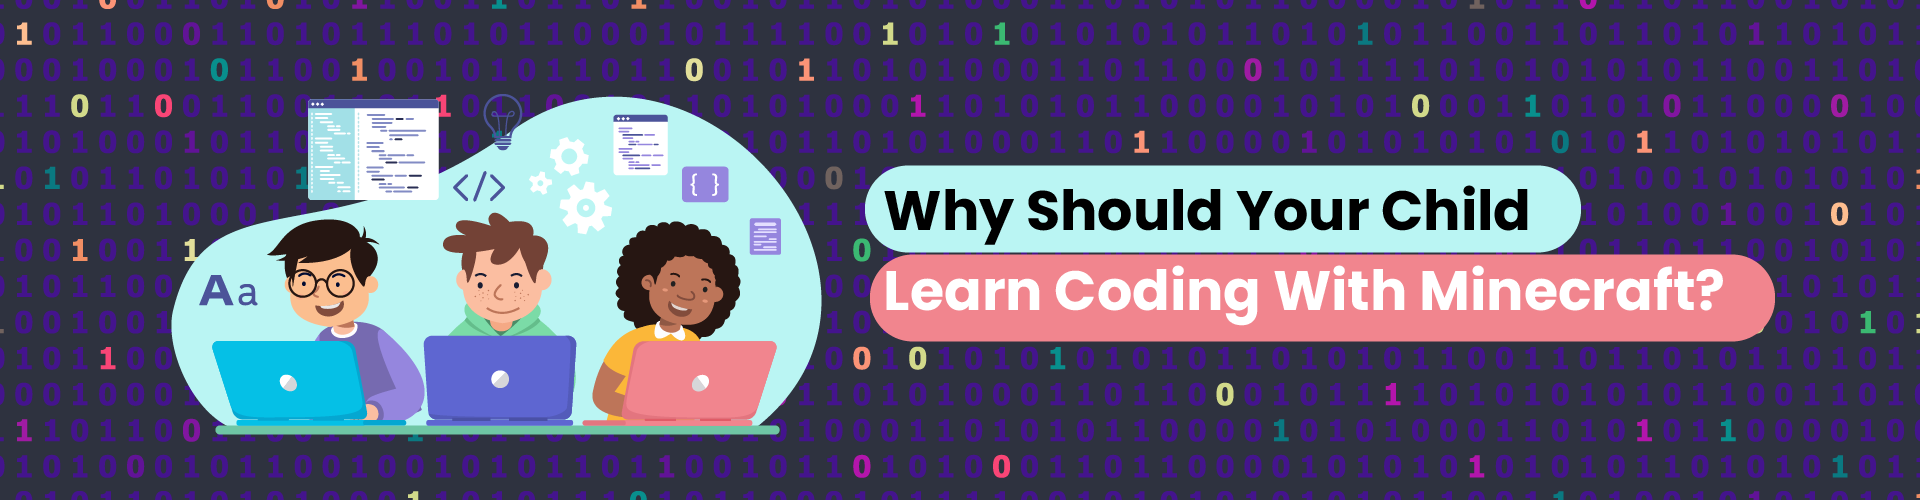 Why Should Your Child Learn Coding With Minecraft?